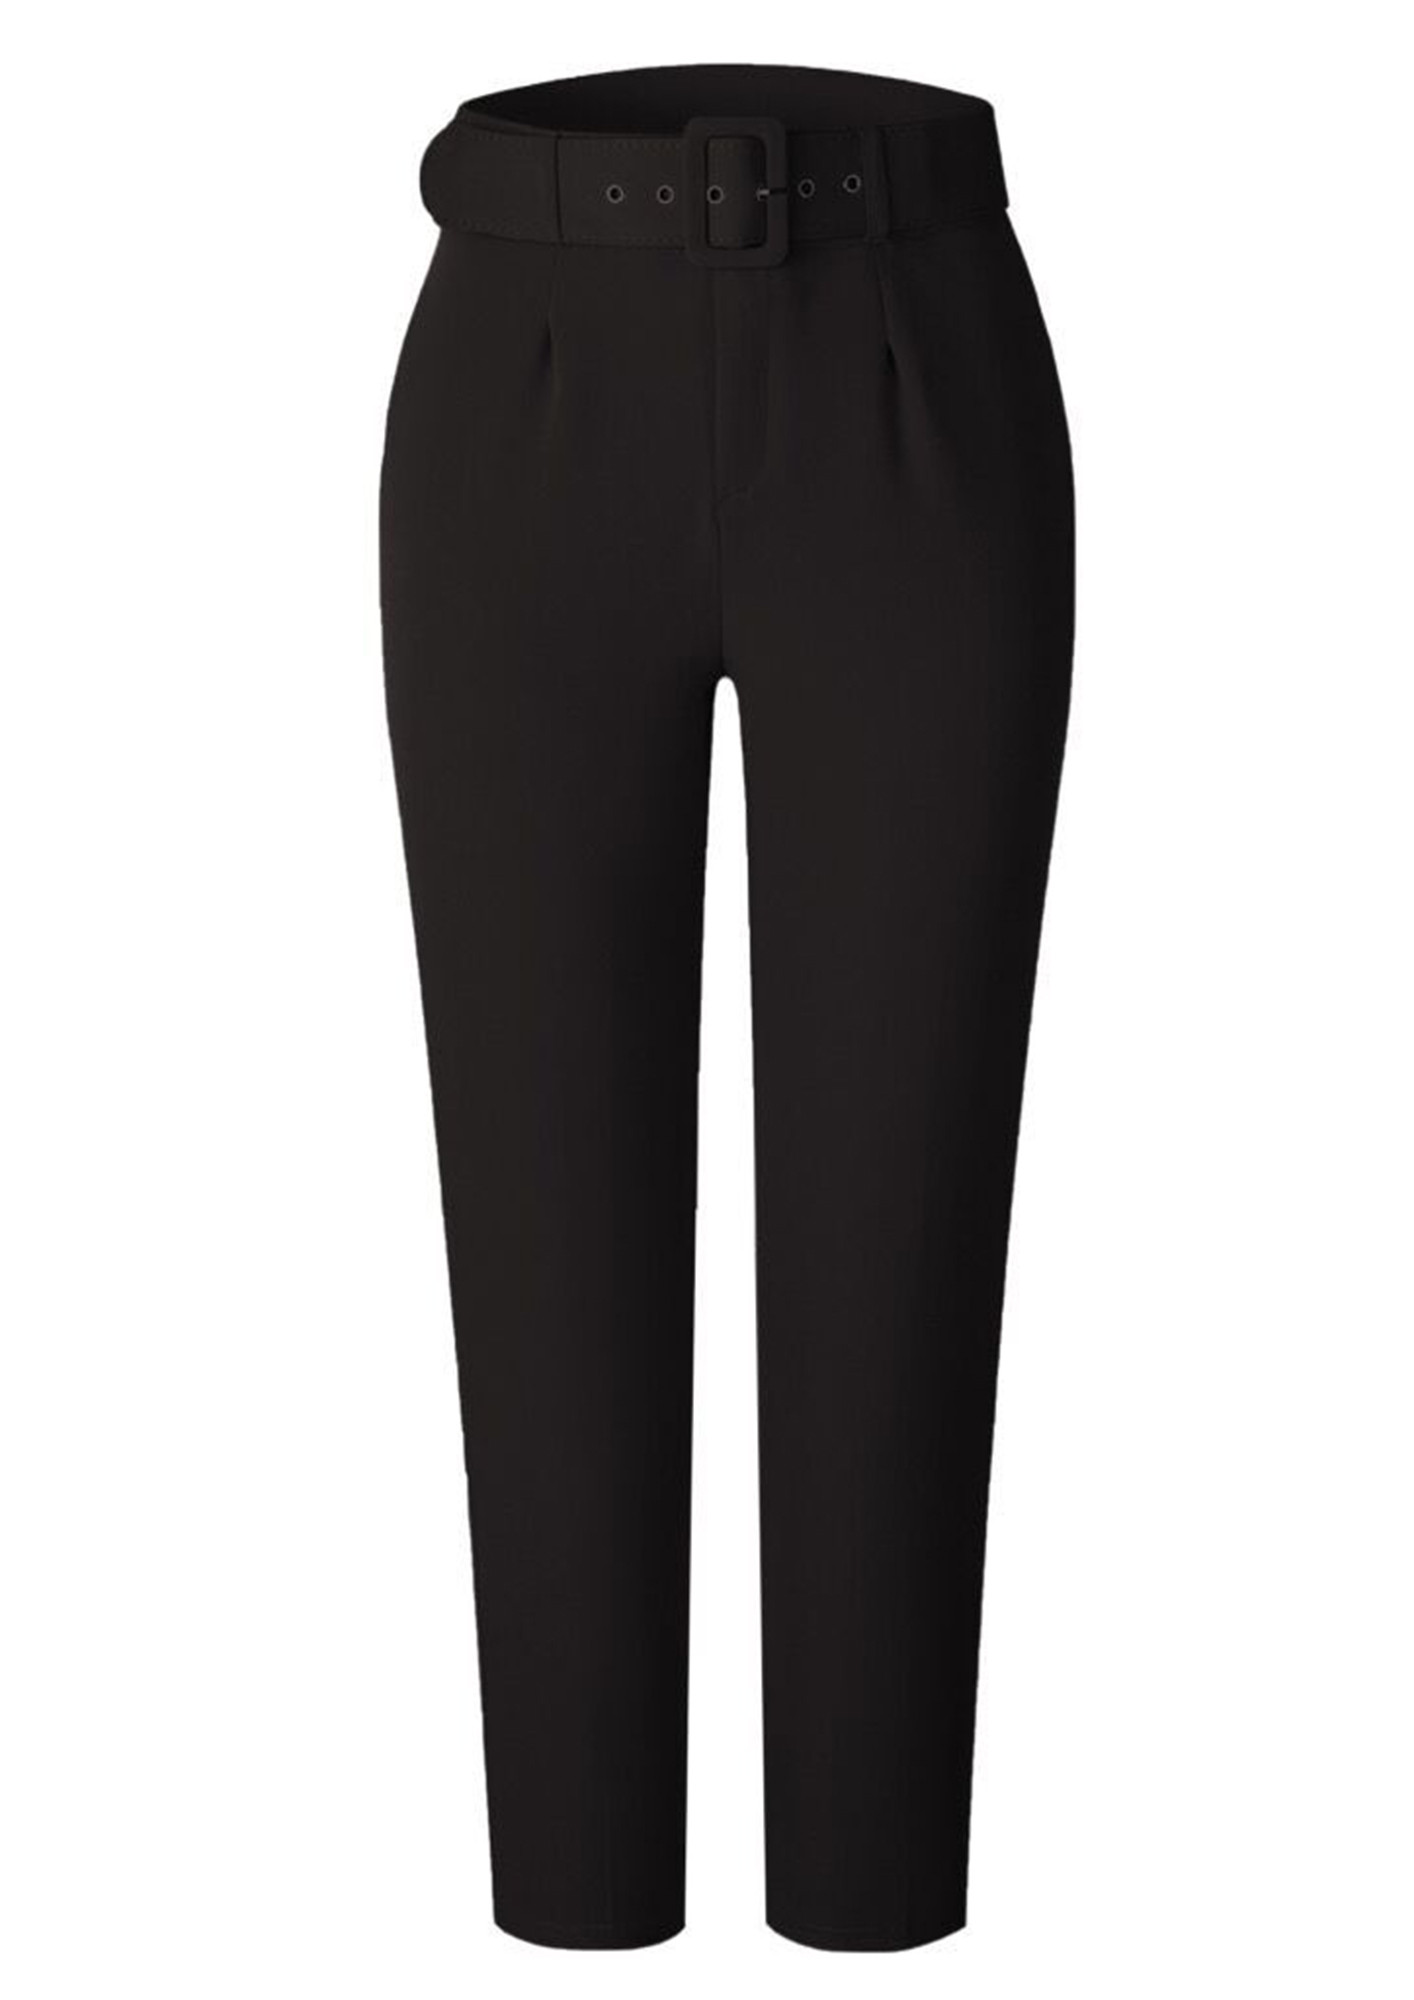 Black Trousers For Women Online – Buy Black Trousers Online in India